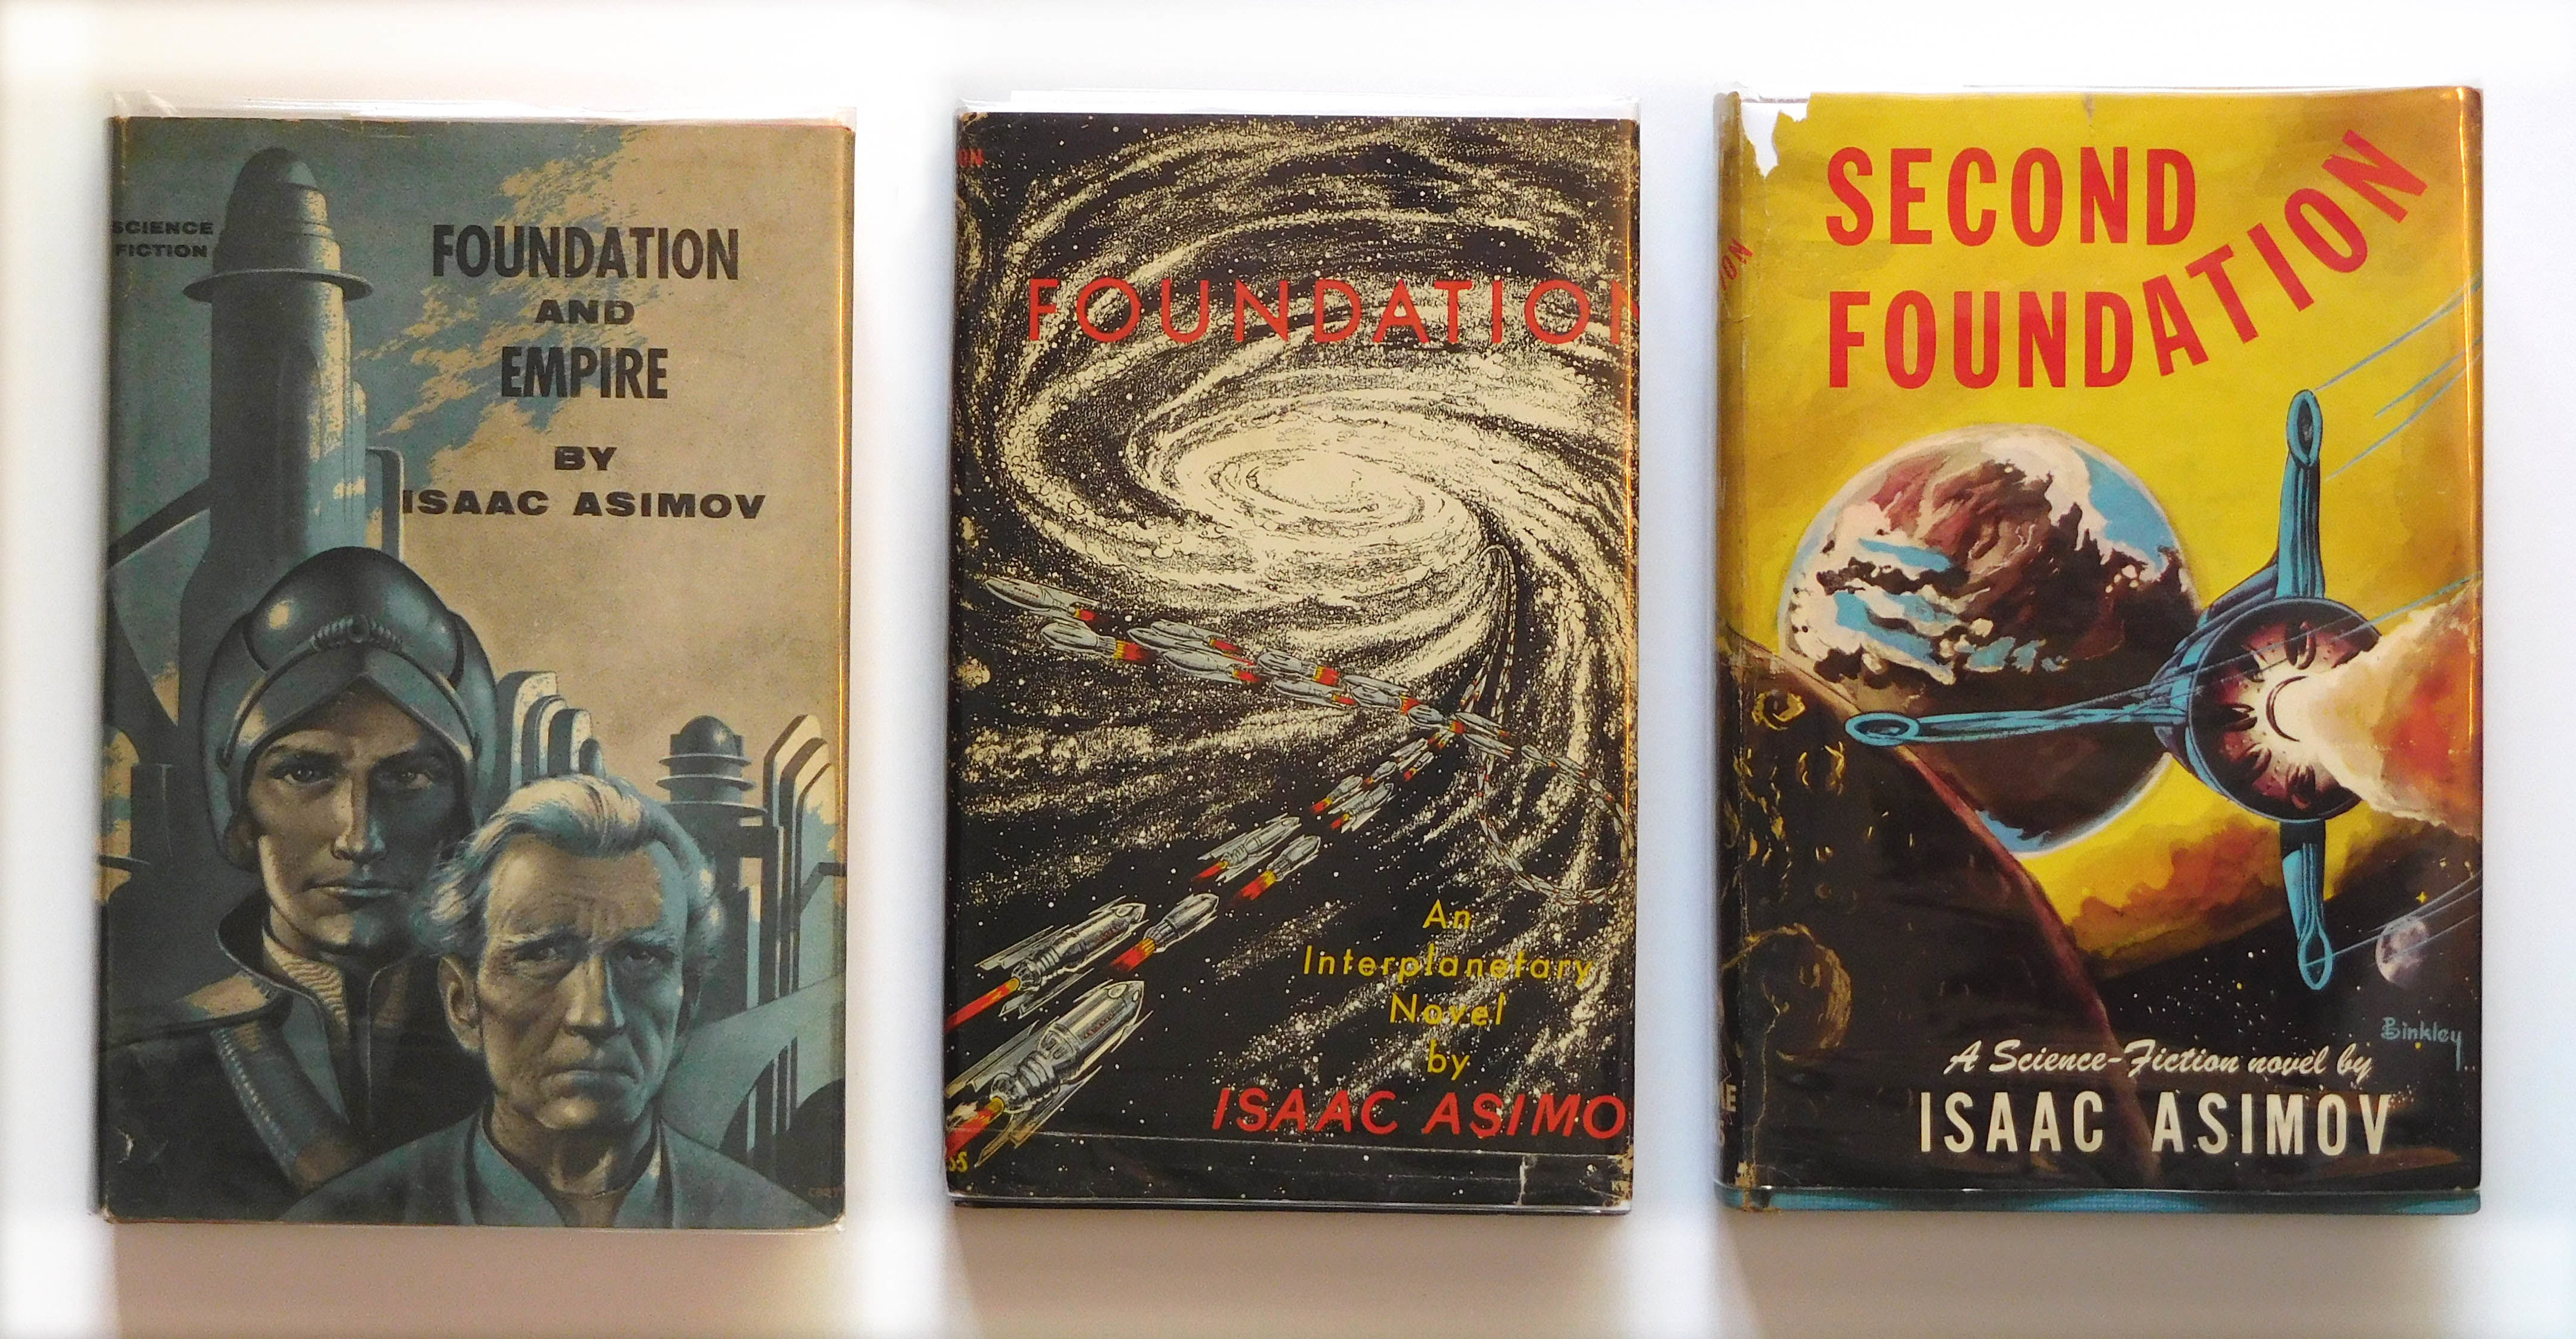 Foundation trilogy, Issac Asimov, First Editions